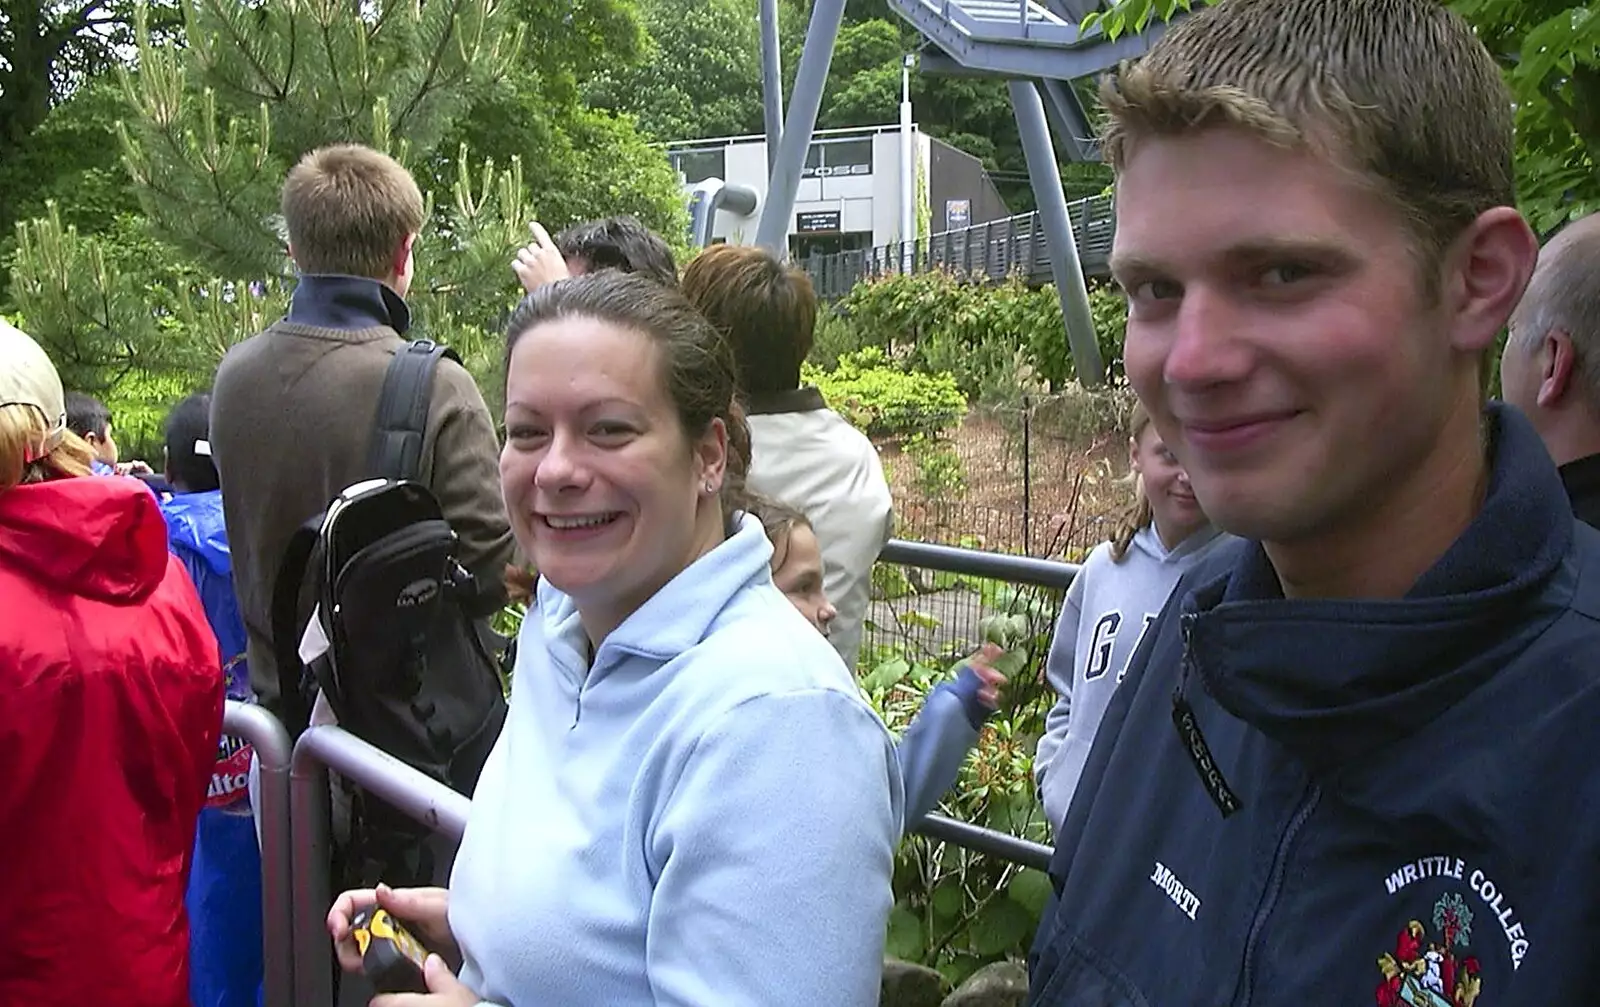 Clare and Phil queue up for Oblivion, from A Trip to Alton Towers, Staffordshire - 19th June 2004